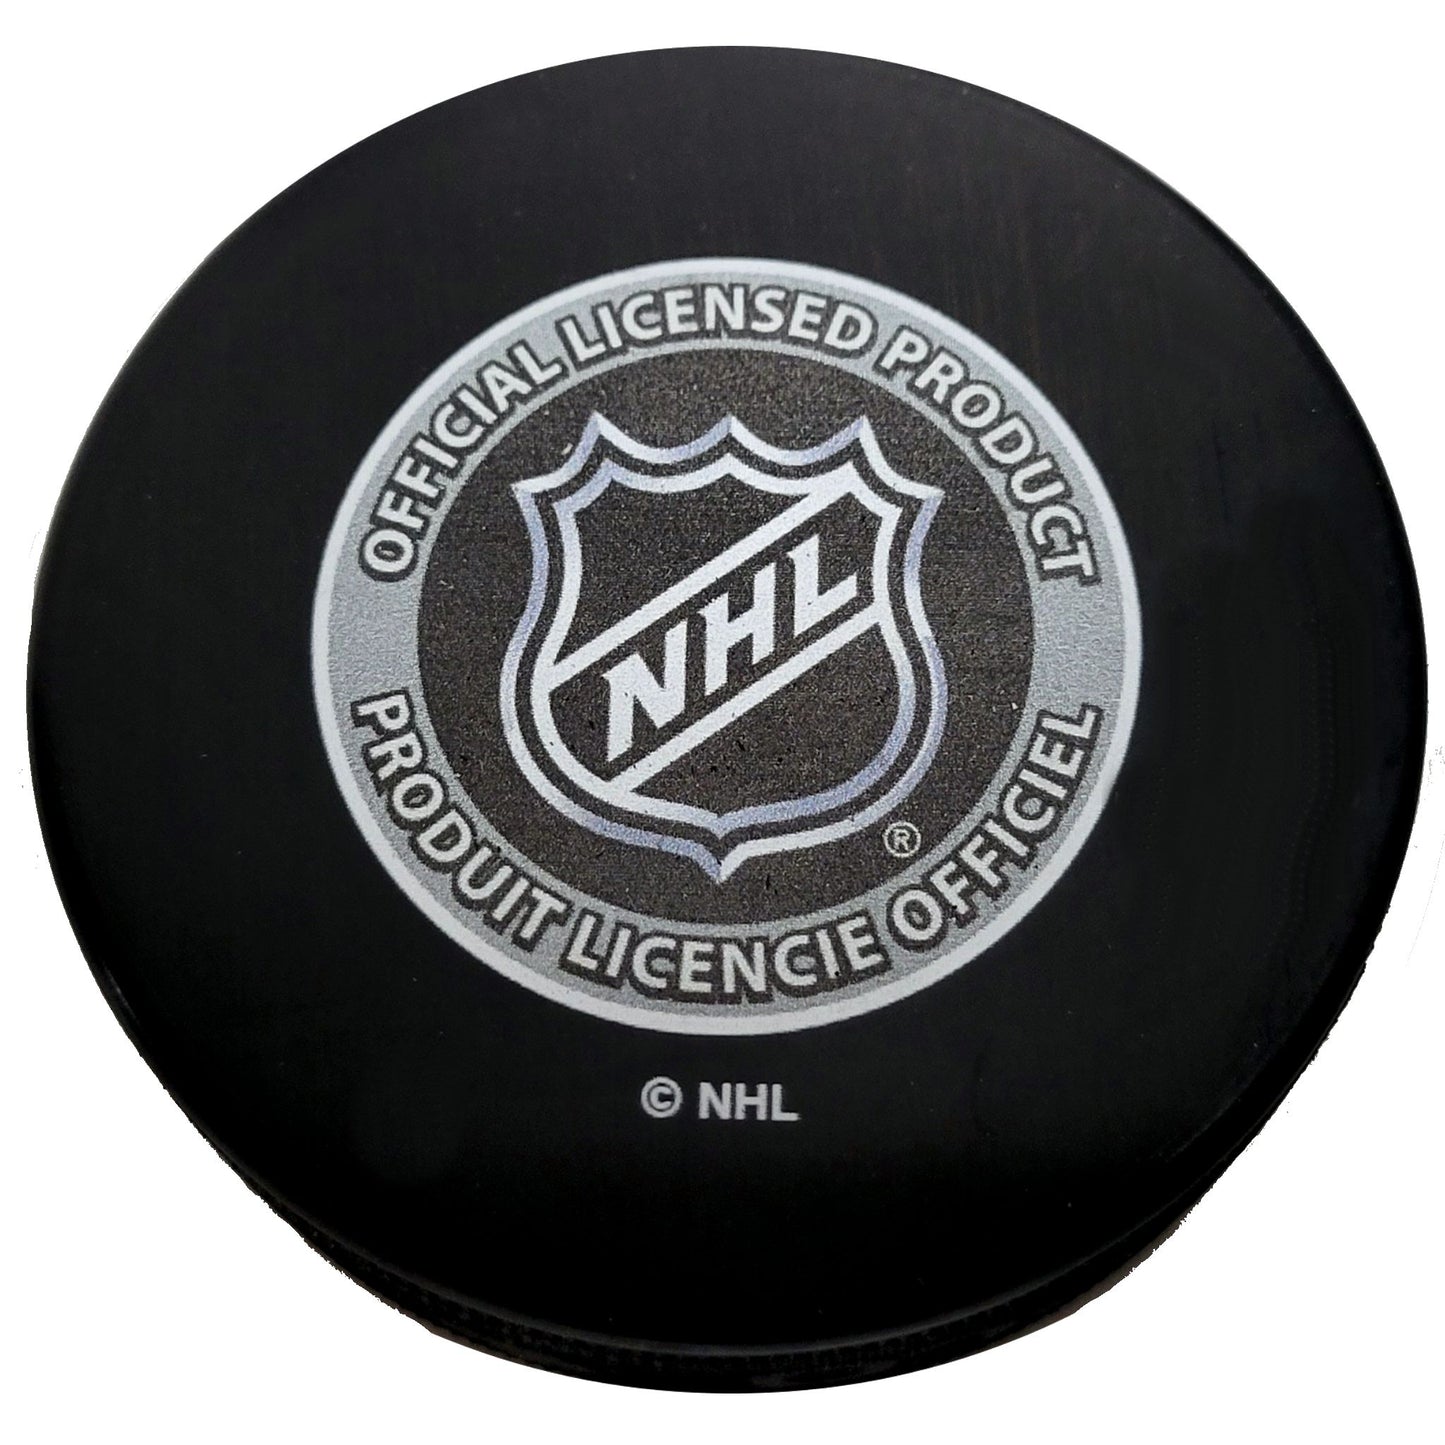 Tampa Bay Lightning Retro Series Collectible Out Of Print Hockey Puck